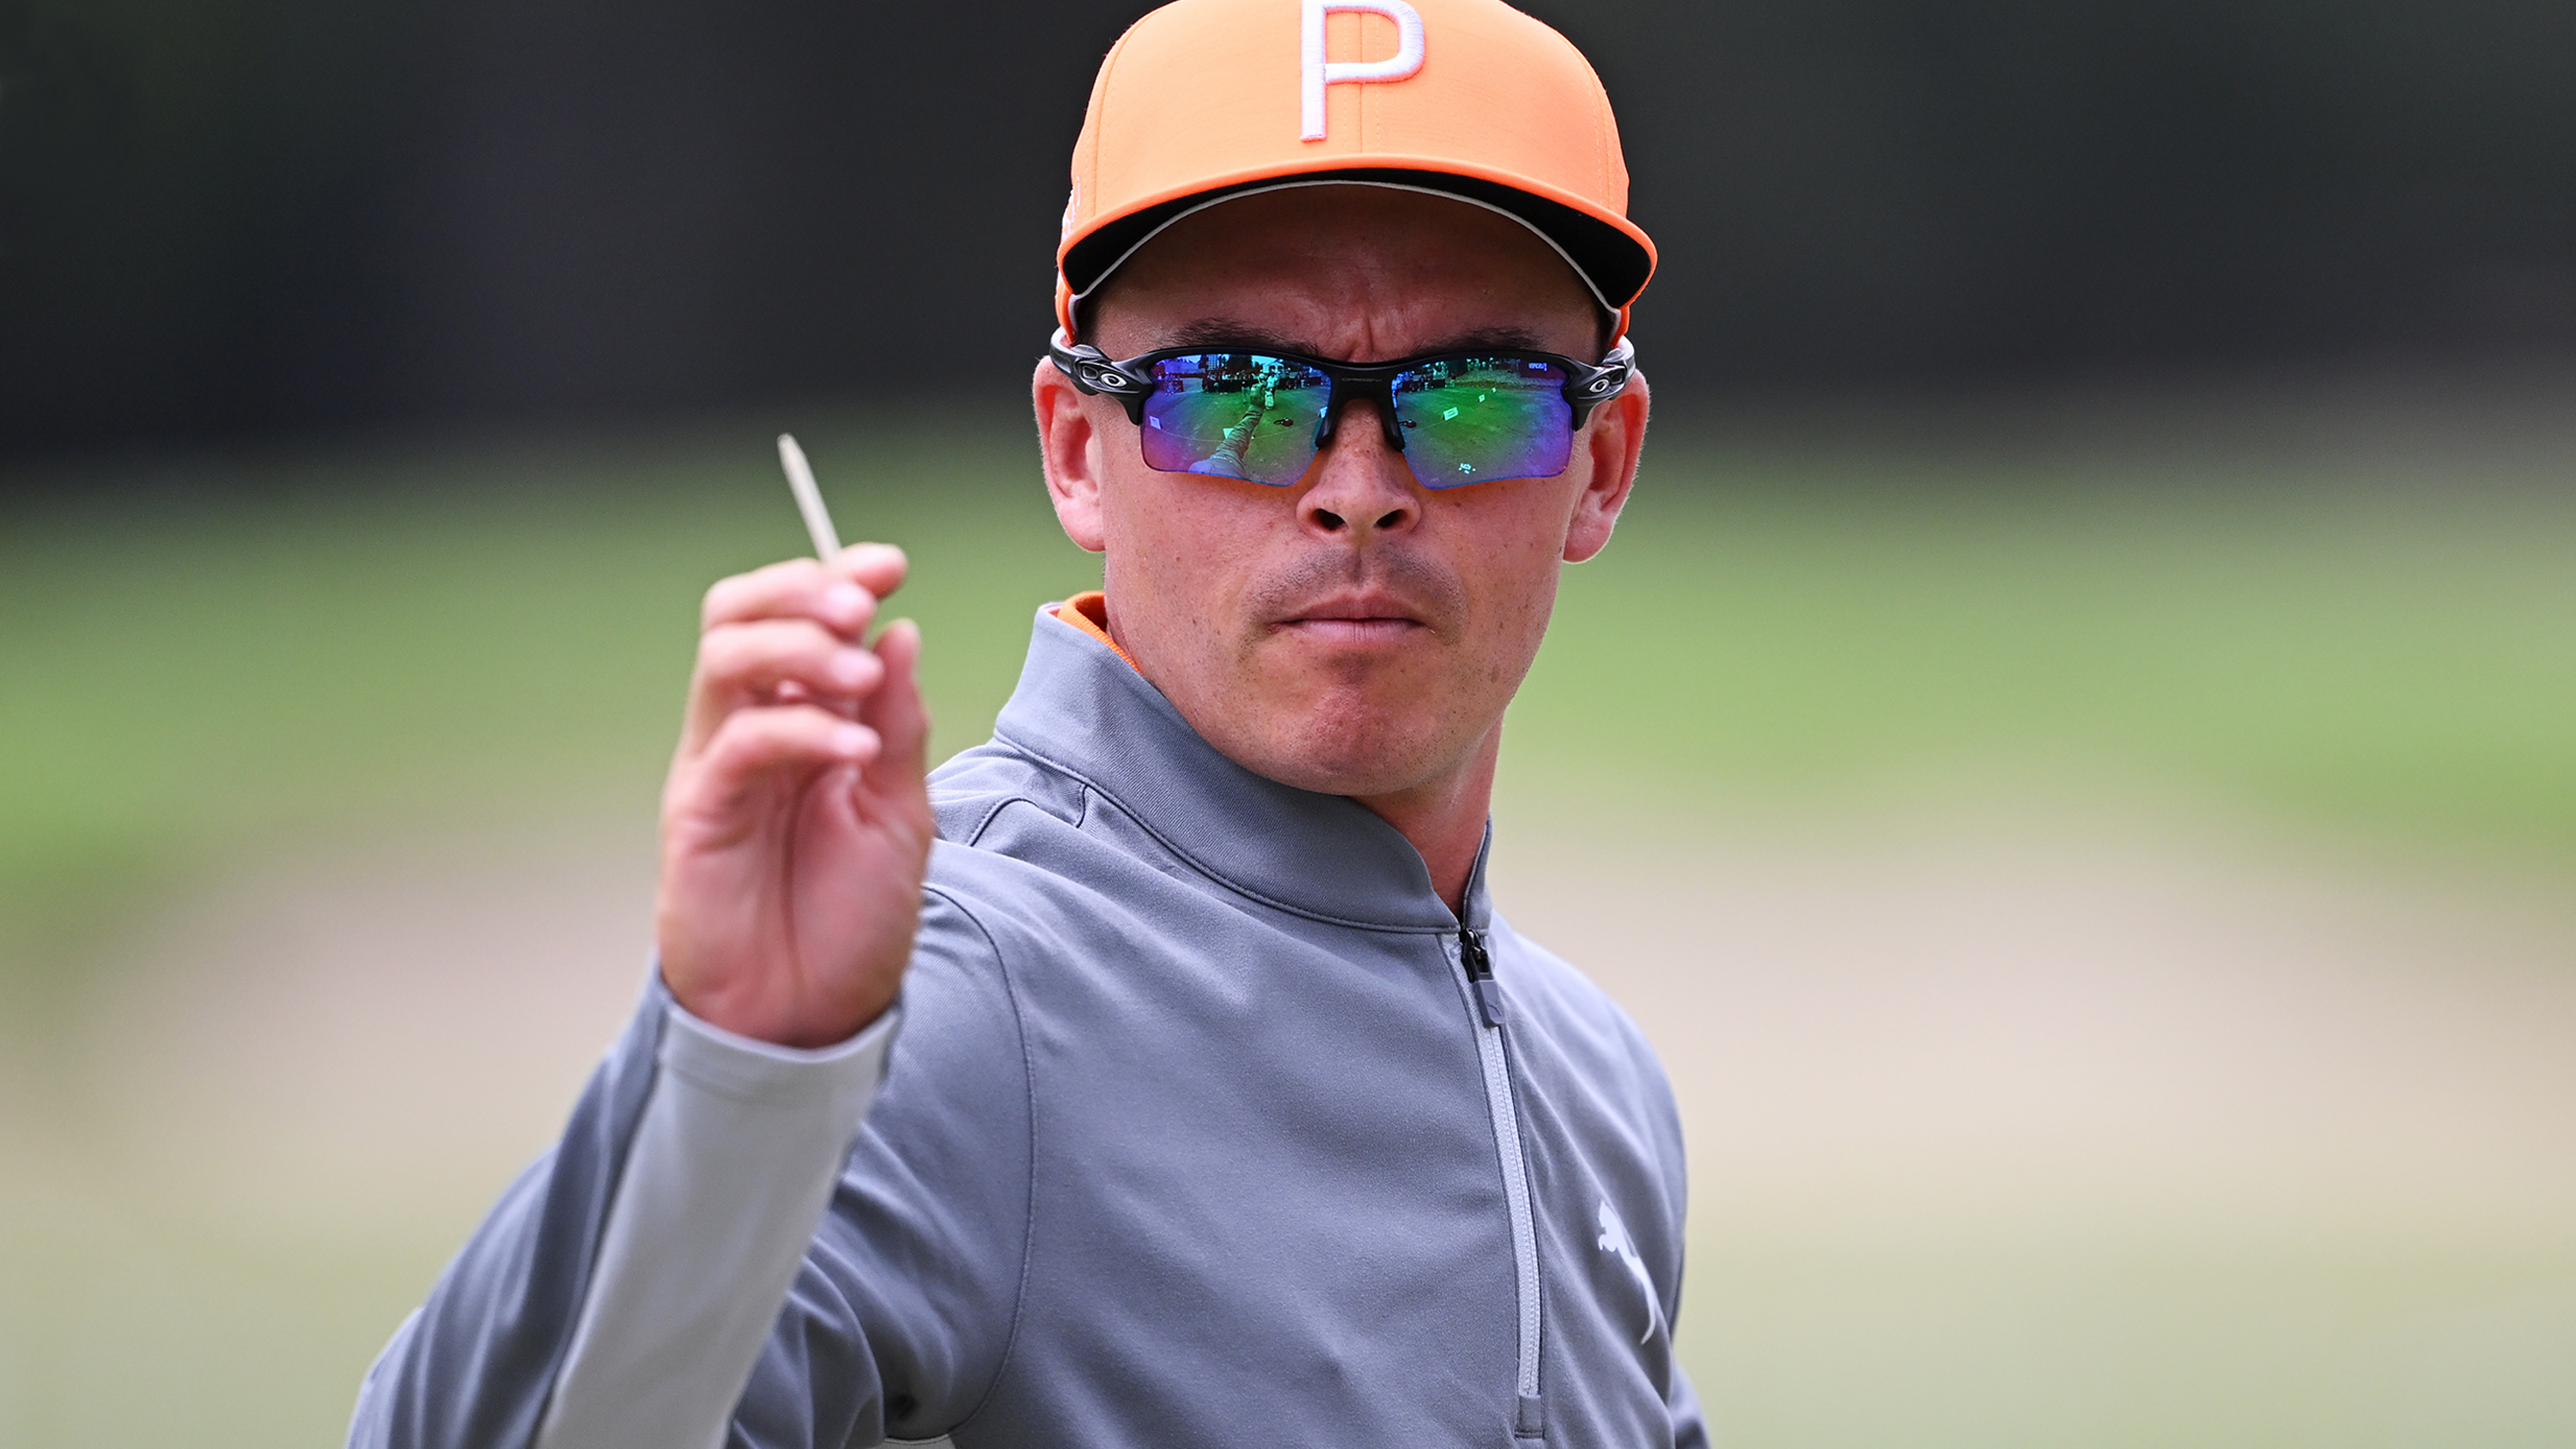 Rickie Fowler Says Lack Of Bathrooms Led To Shaky Finish